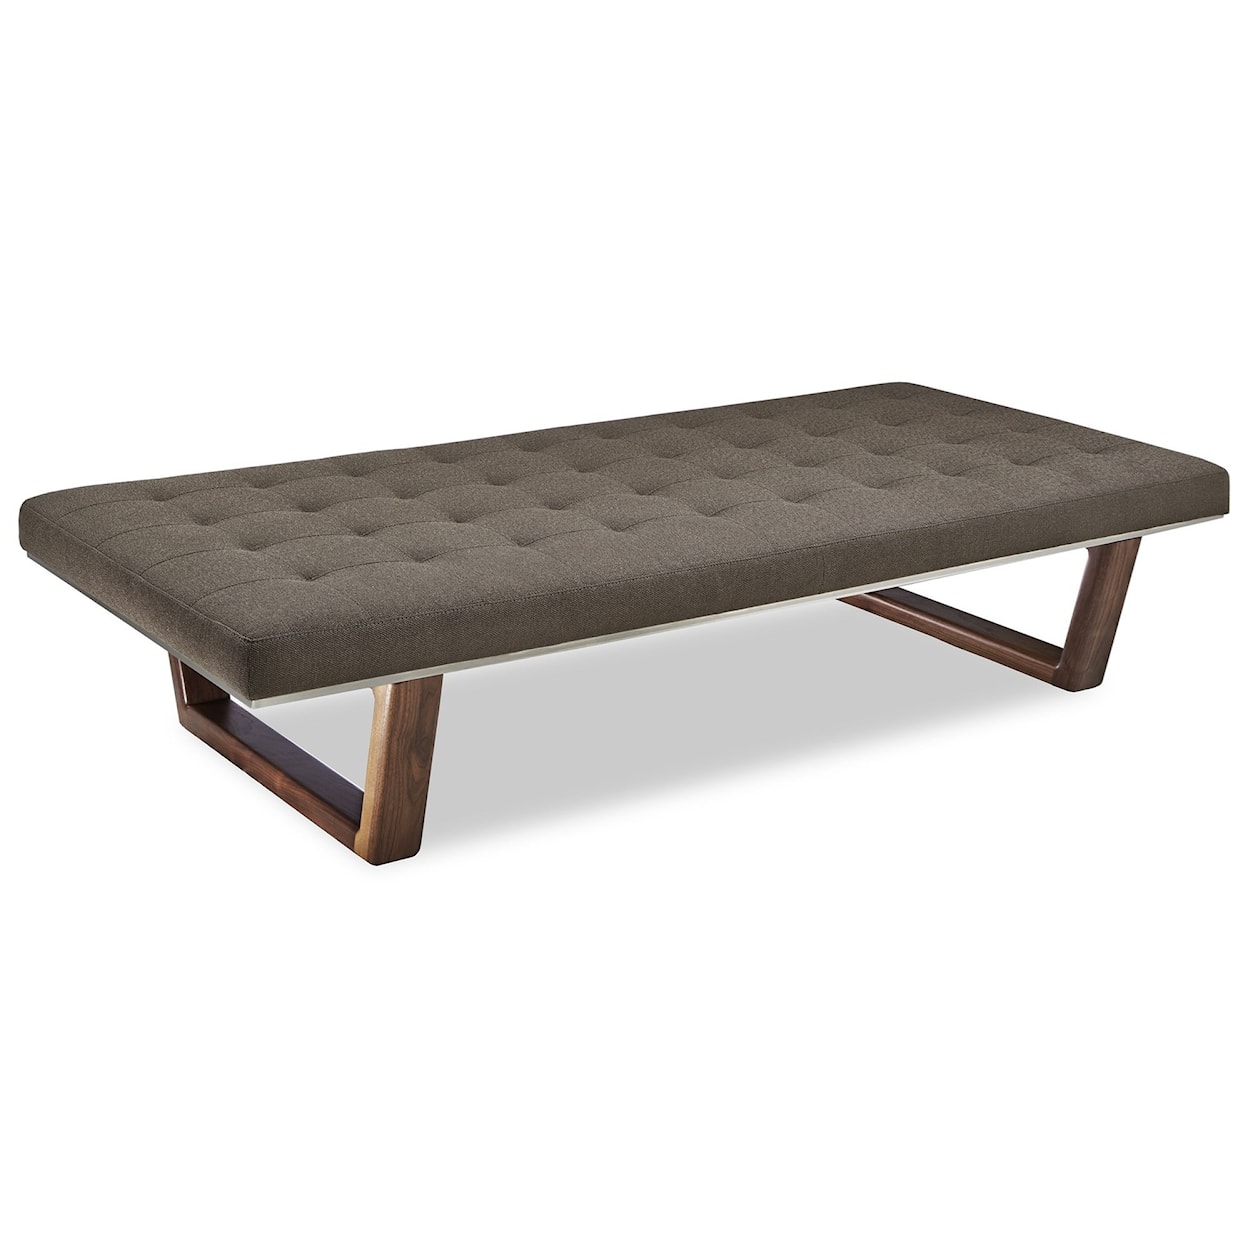 American Leather Edison Upholstered Bench